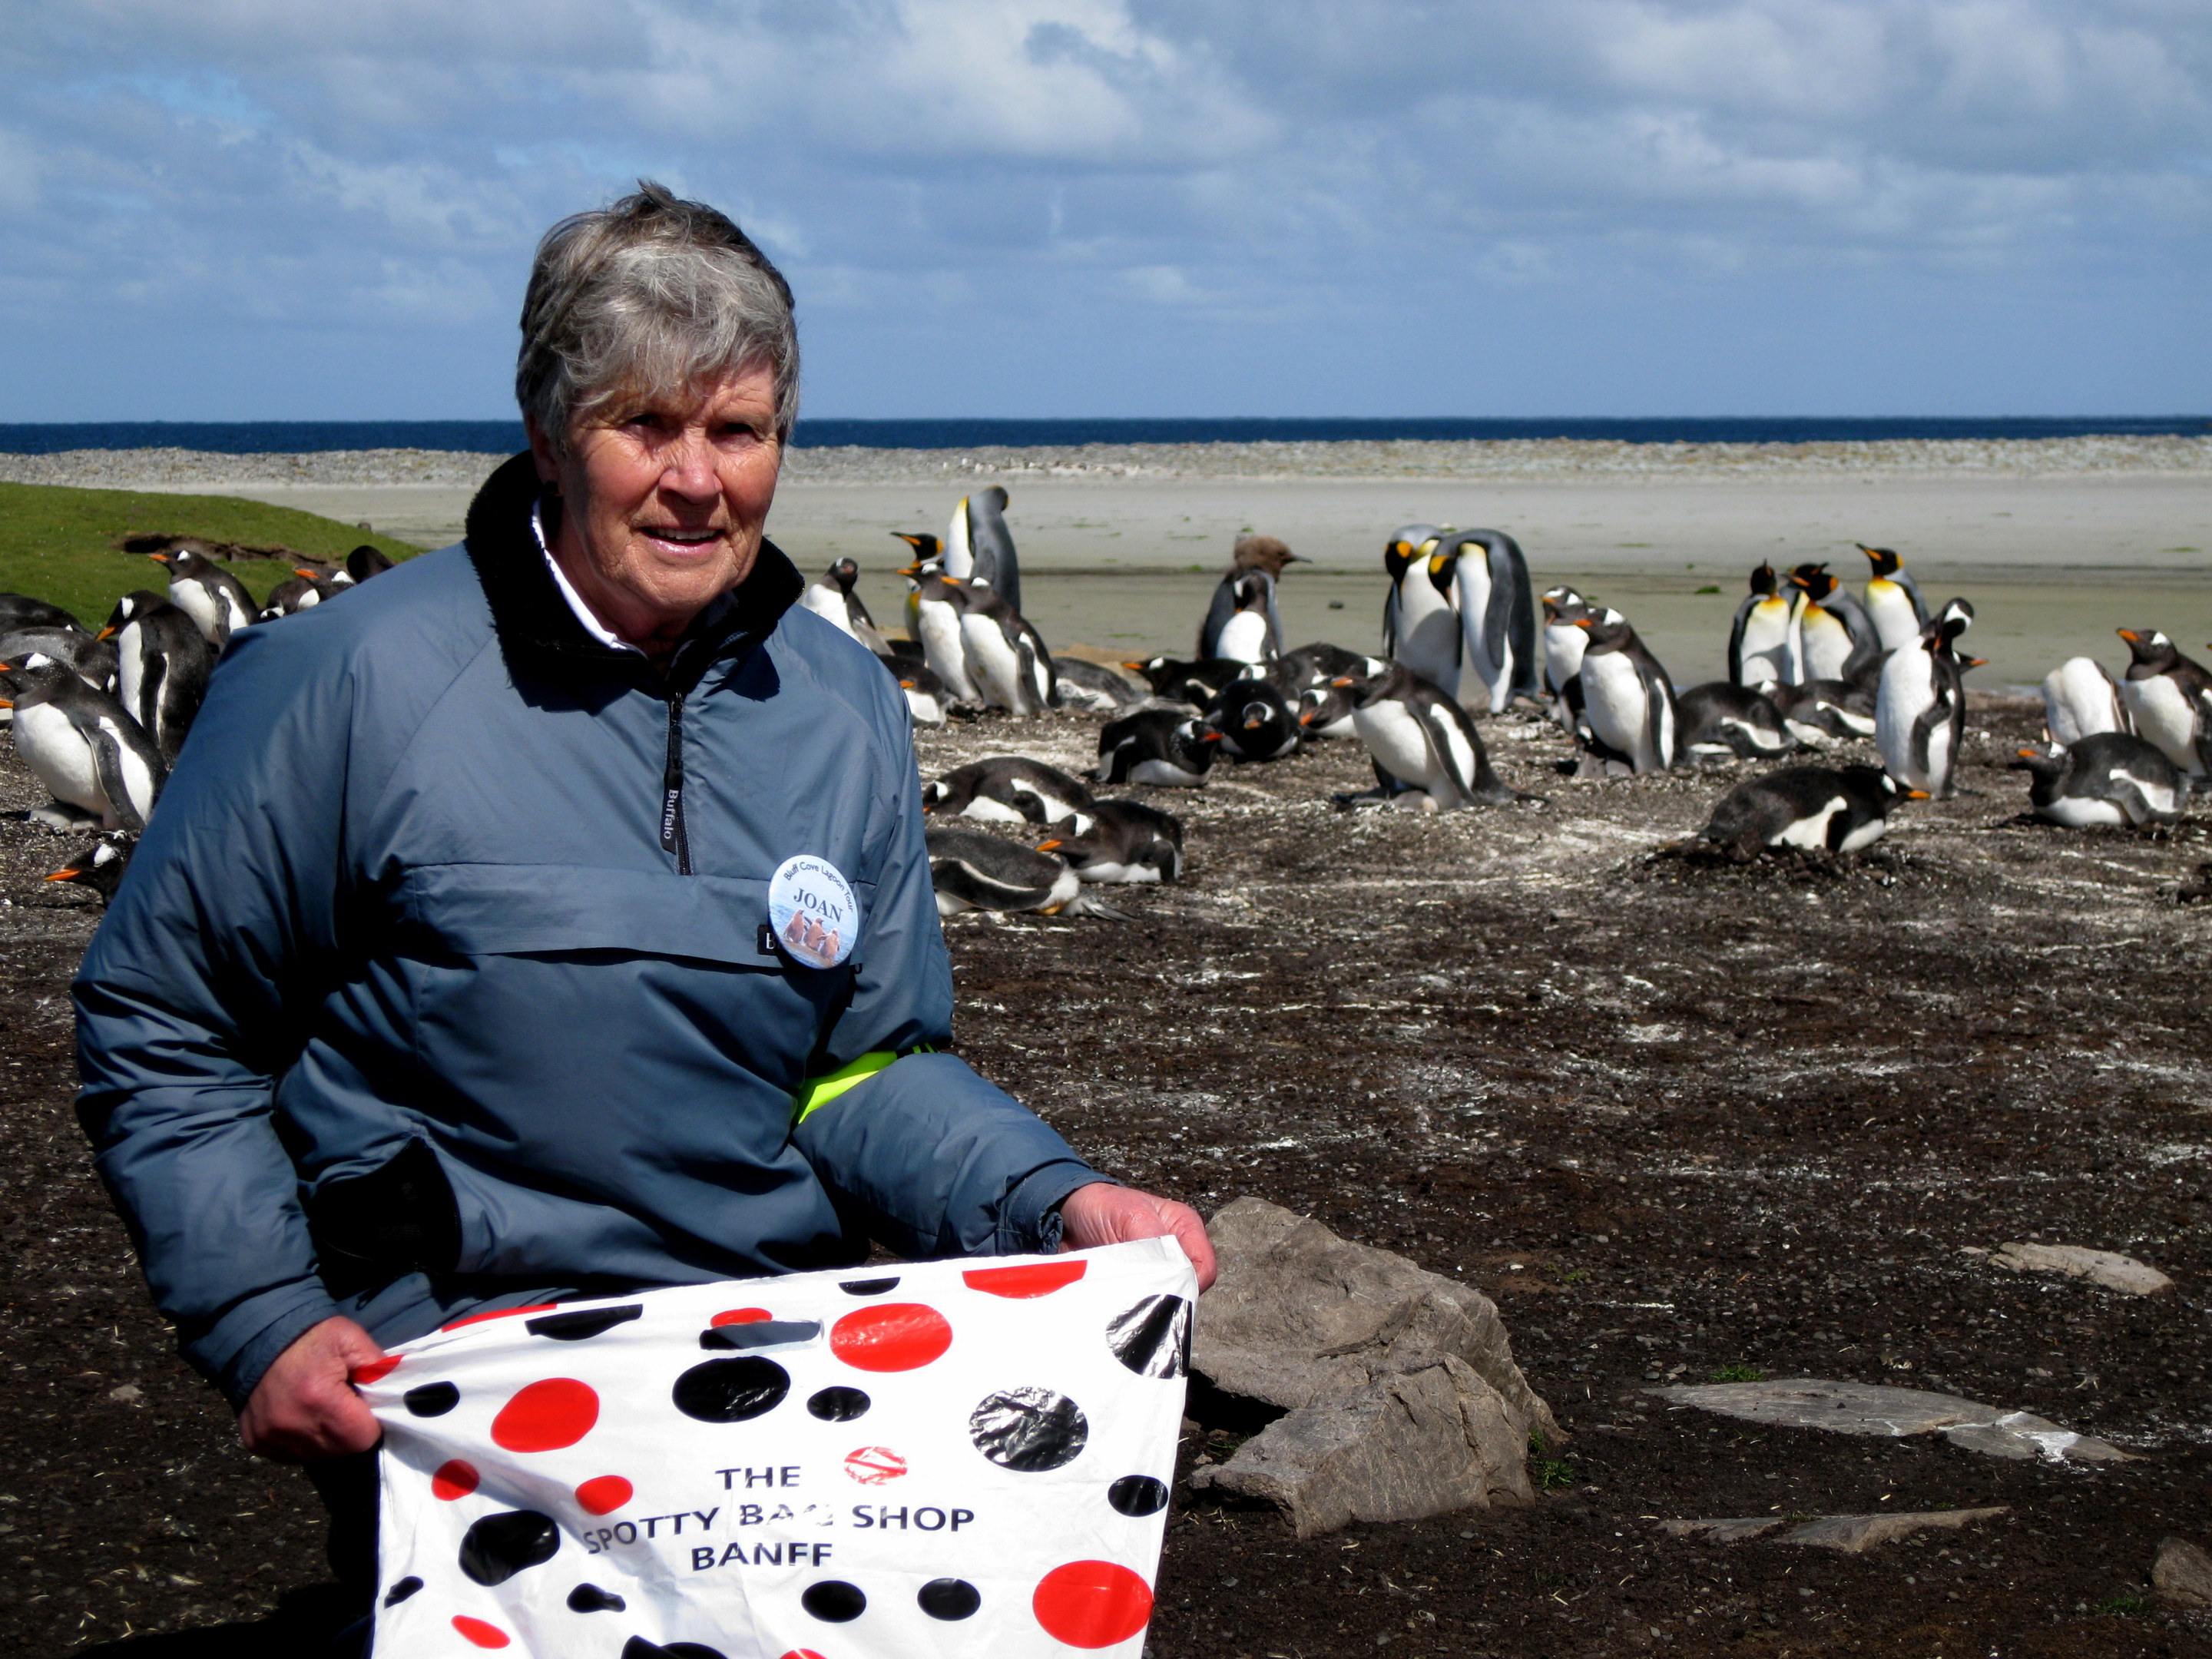 Joan Spruce on the Falkand Islands with a spotty bag